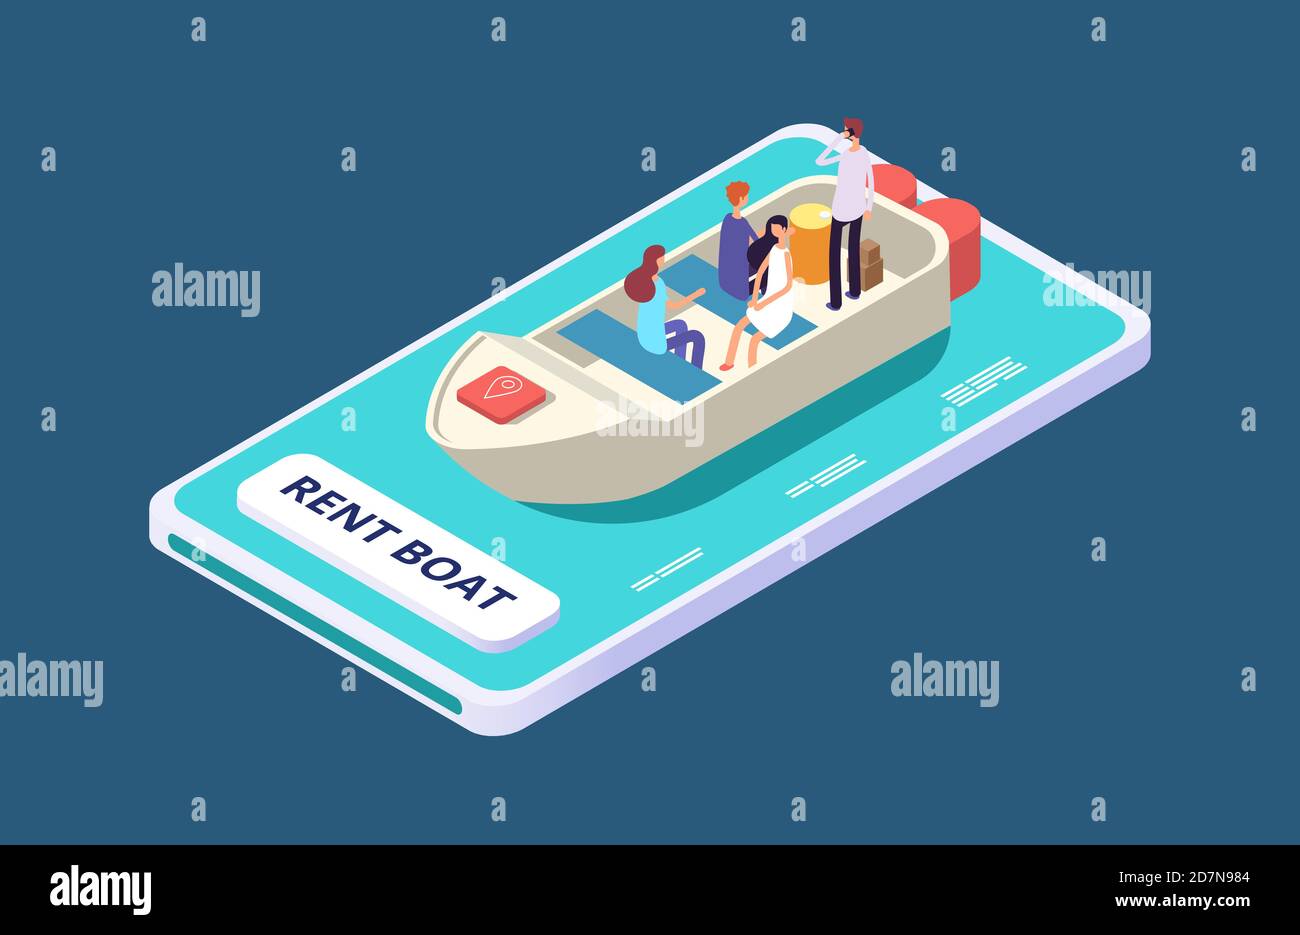 Rent a boat mobile app isometric vector concept. Illustration of service rent sea transport online Stock Vector